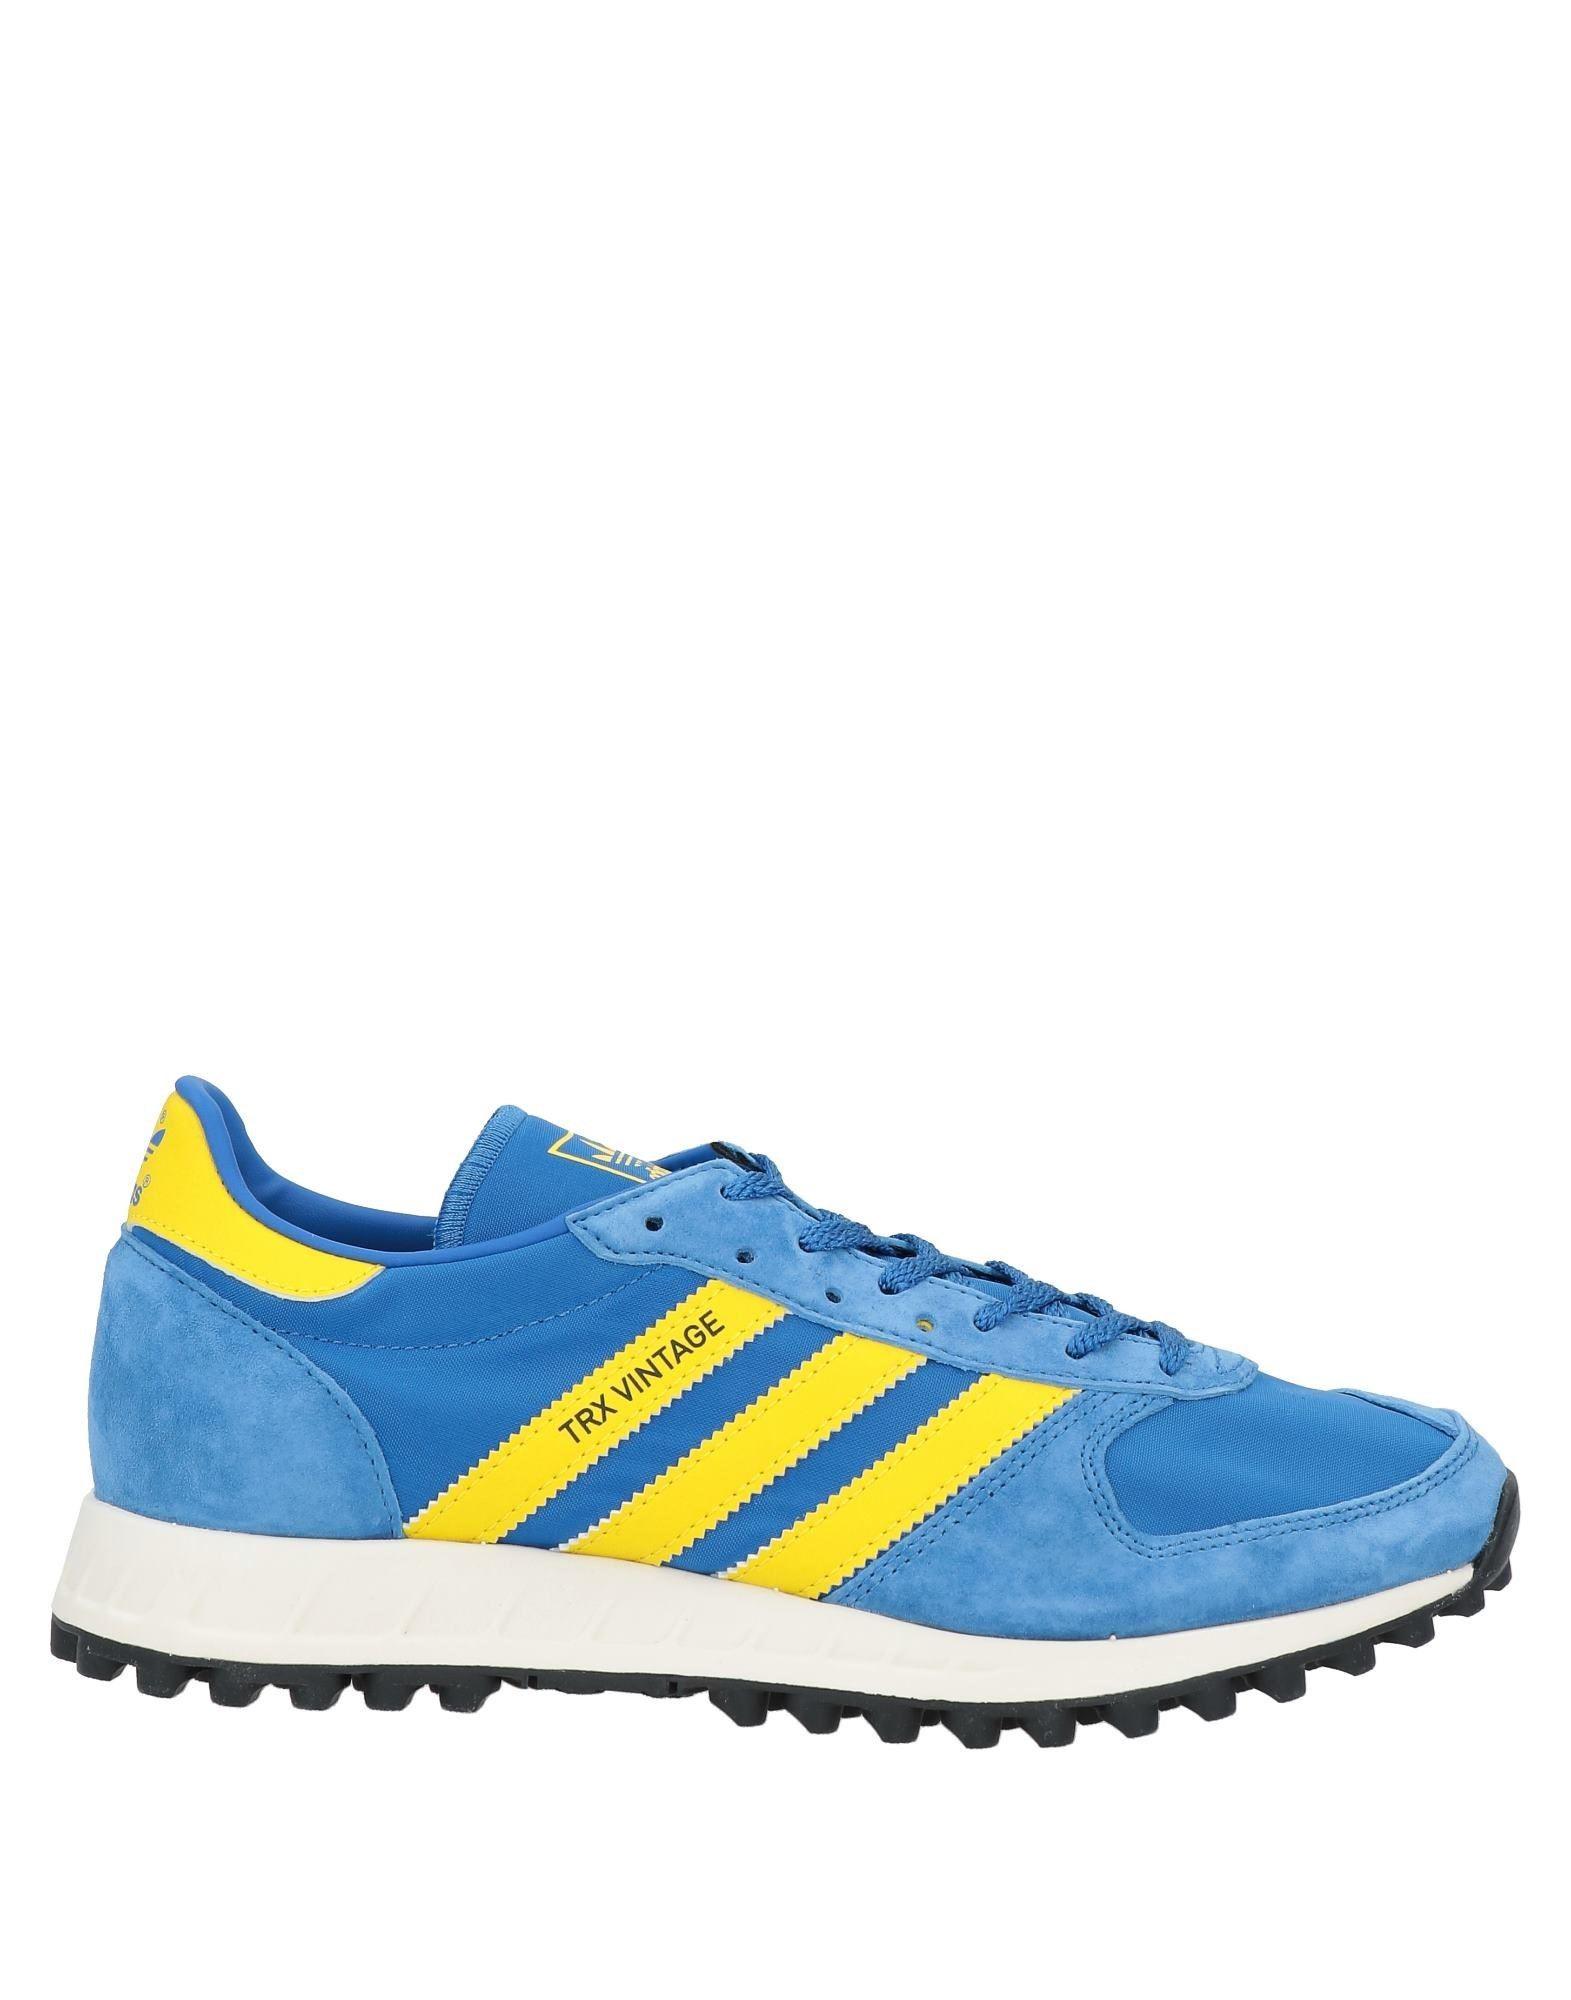 adidas Originals Leather Trainers in Blue for Men - Lyst